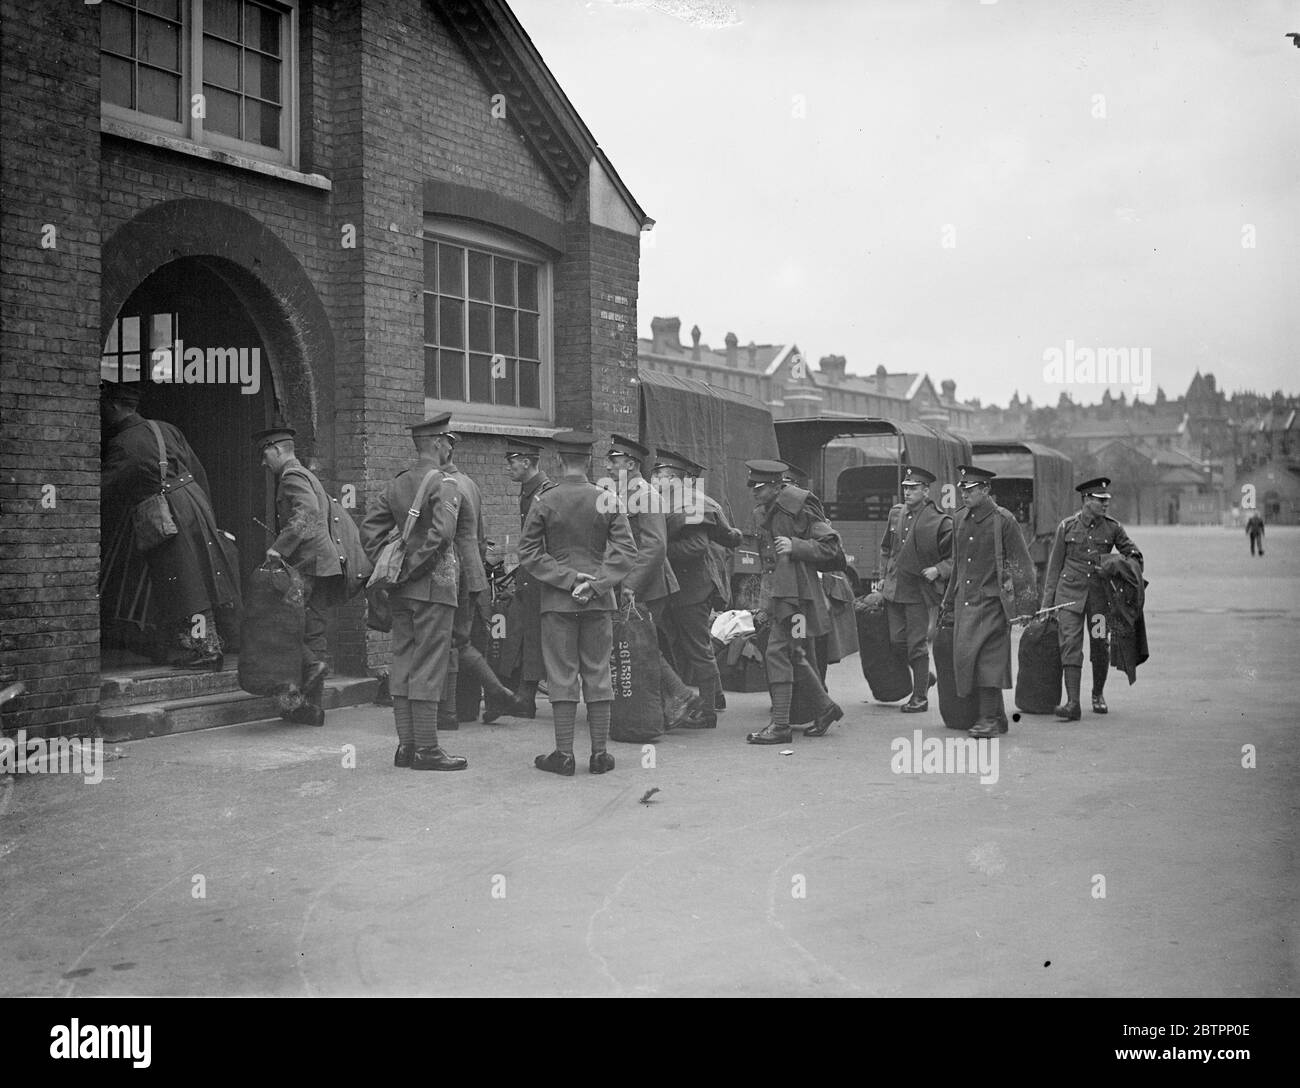 Grenadiers prepare at Chelsea Barracks. May be part of Czechoslovakia, International Force. Men of the 1 Battalion Grenadier Guards, who are expected to be part of the International Force during the plebiscite in Czechoslovakia, are preparing at Chelsea Barracks, London. The 1st Battalion is being made up to full strength with men from the 2nd and 3rd Battalions. Photo shows, men of the 3rd Battalion Grenadier Guards with kitbags at Chelsea Barracks. 3 October 1938 Stock Photo